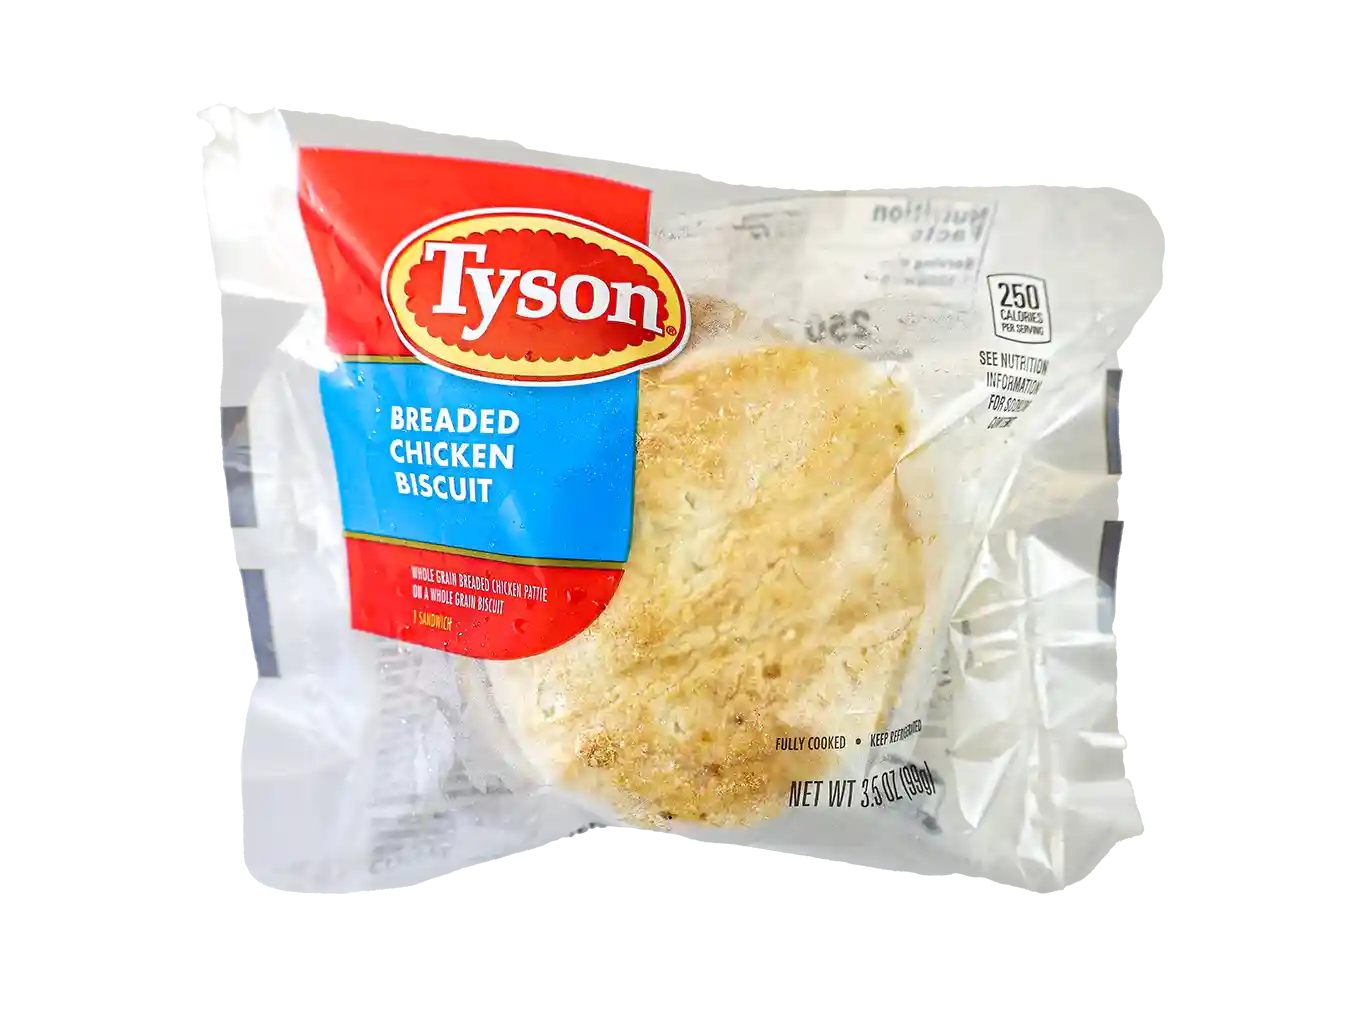 Tyson® Fully Cooked Whole Grain Breaded Chicken Patty on a Whole Grain Biscuit, 100/3.15 oz._image_21